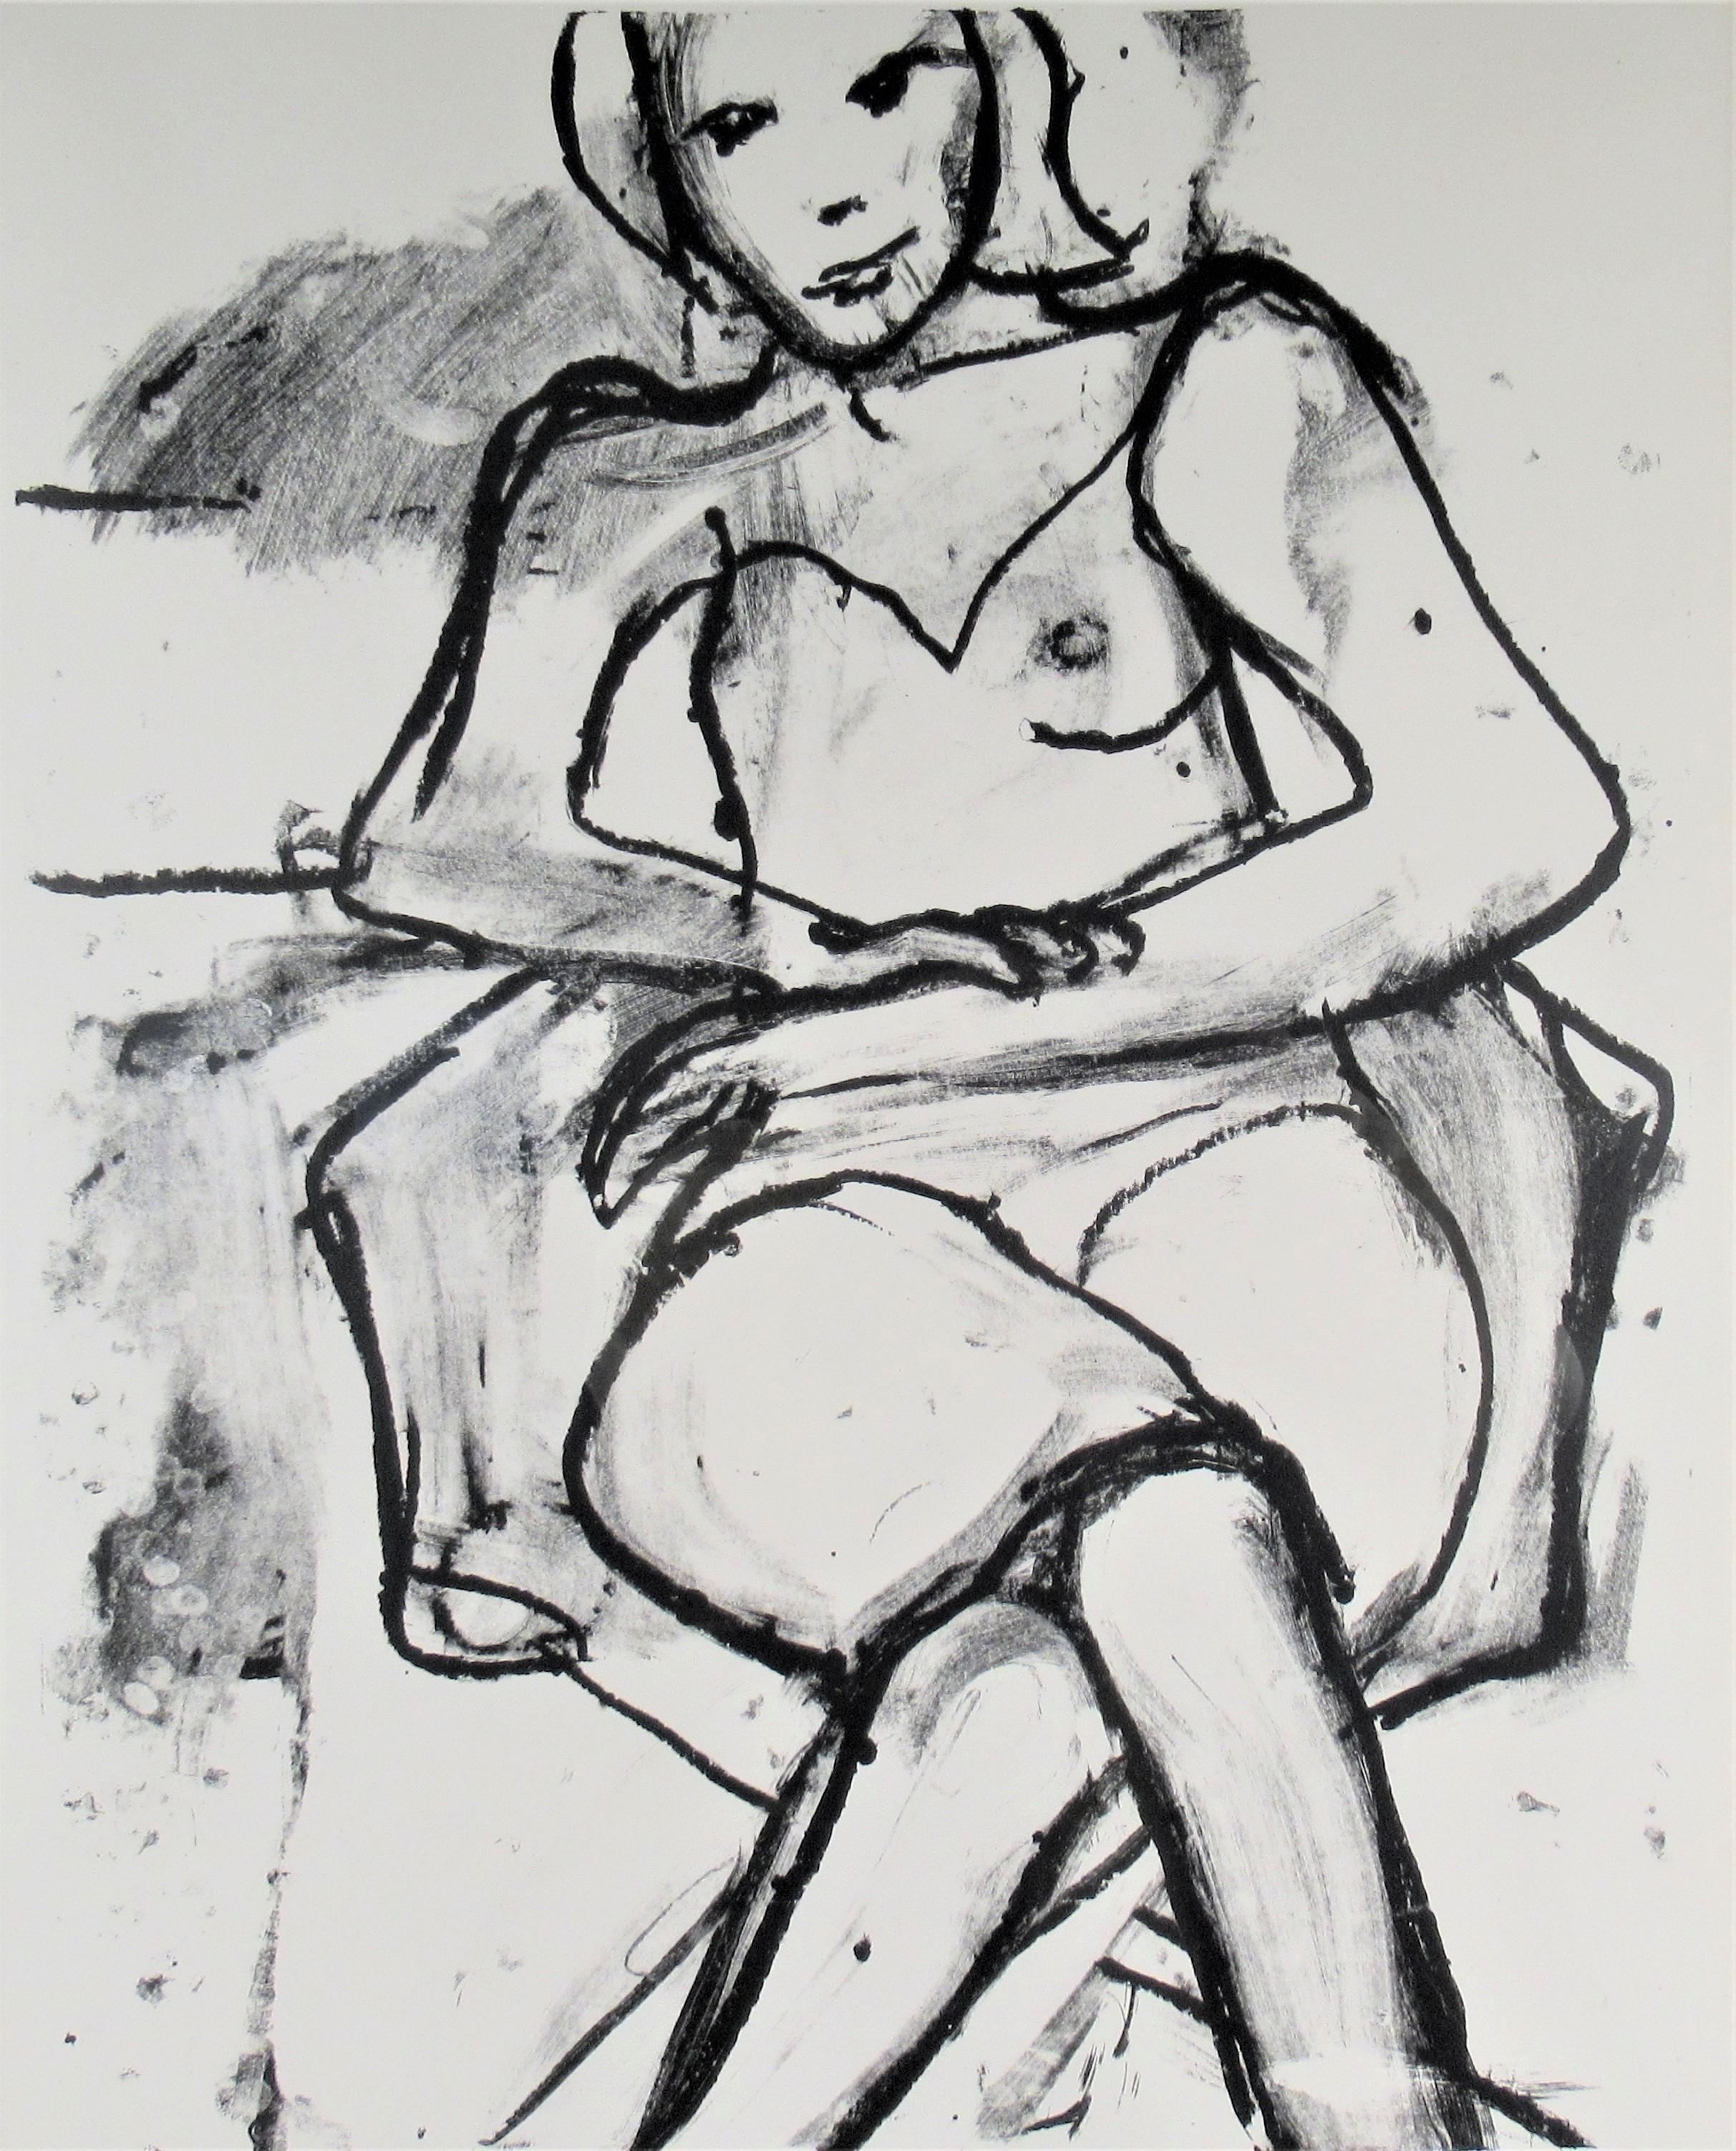 Seated Woman (With Legs and Arms Crossed)  - Print by Richard Diebenkorn